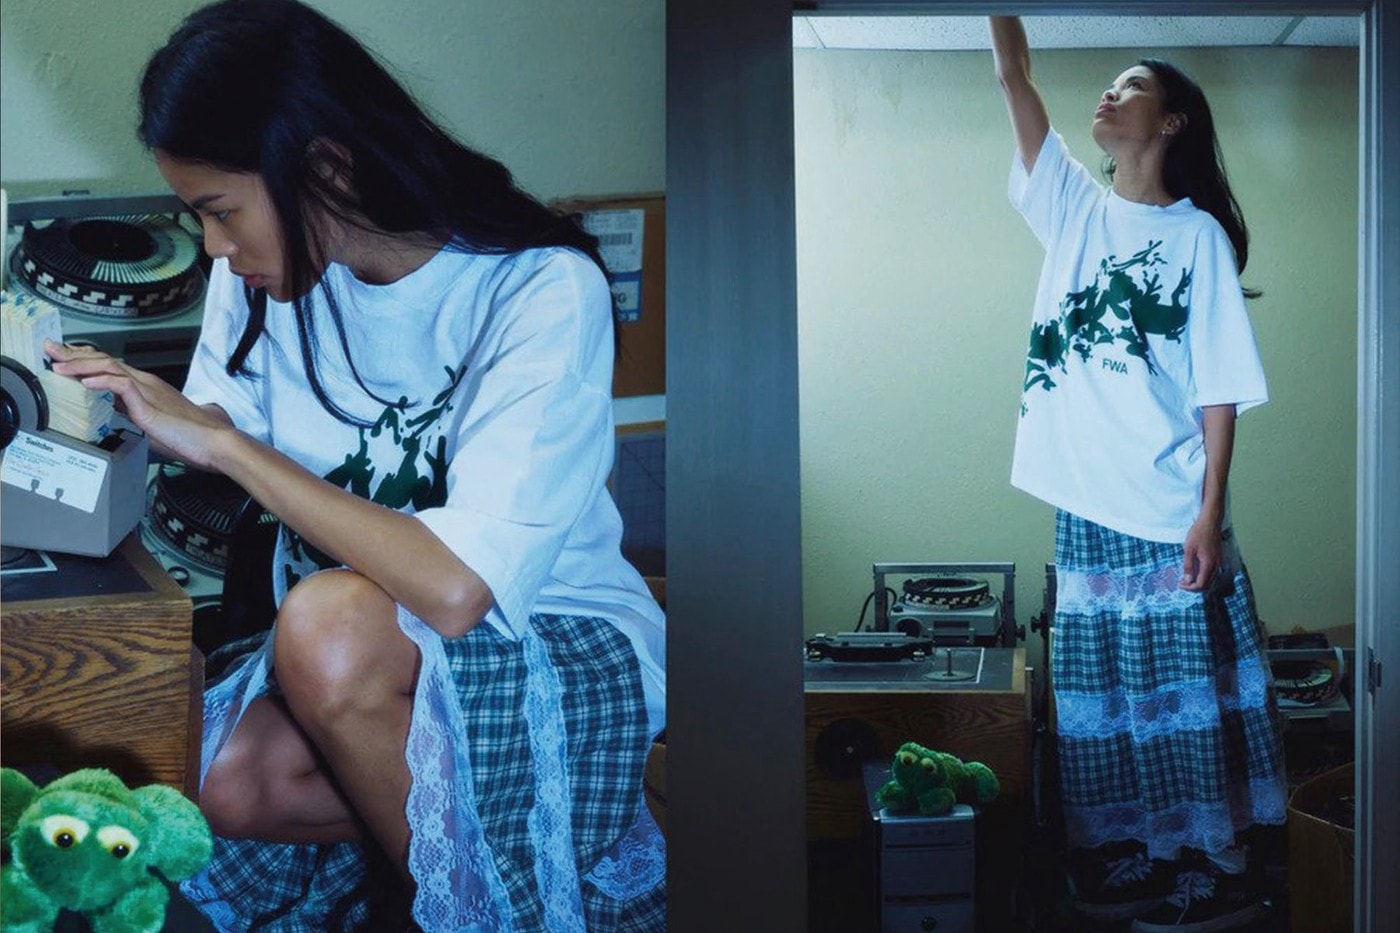 Friends With Animals 正式發佈最新系列「NOCTURNAL FWA」Lookbook